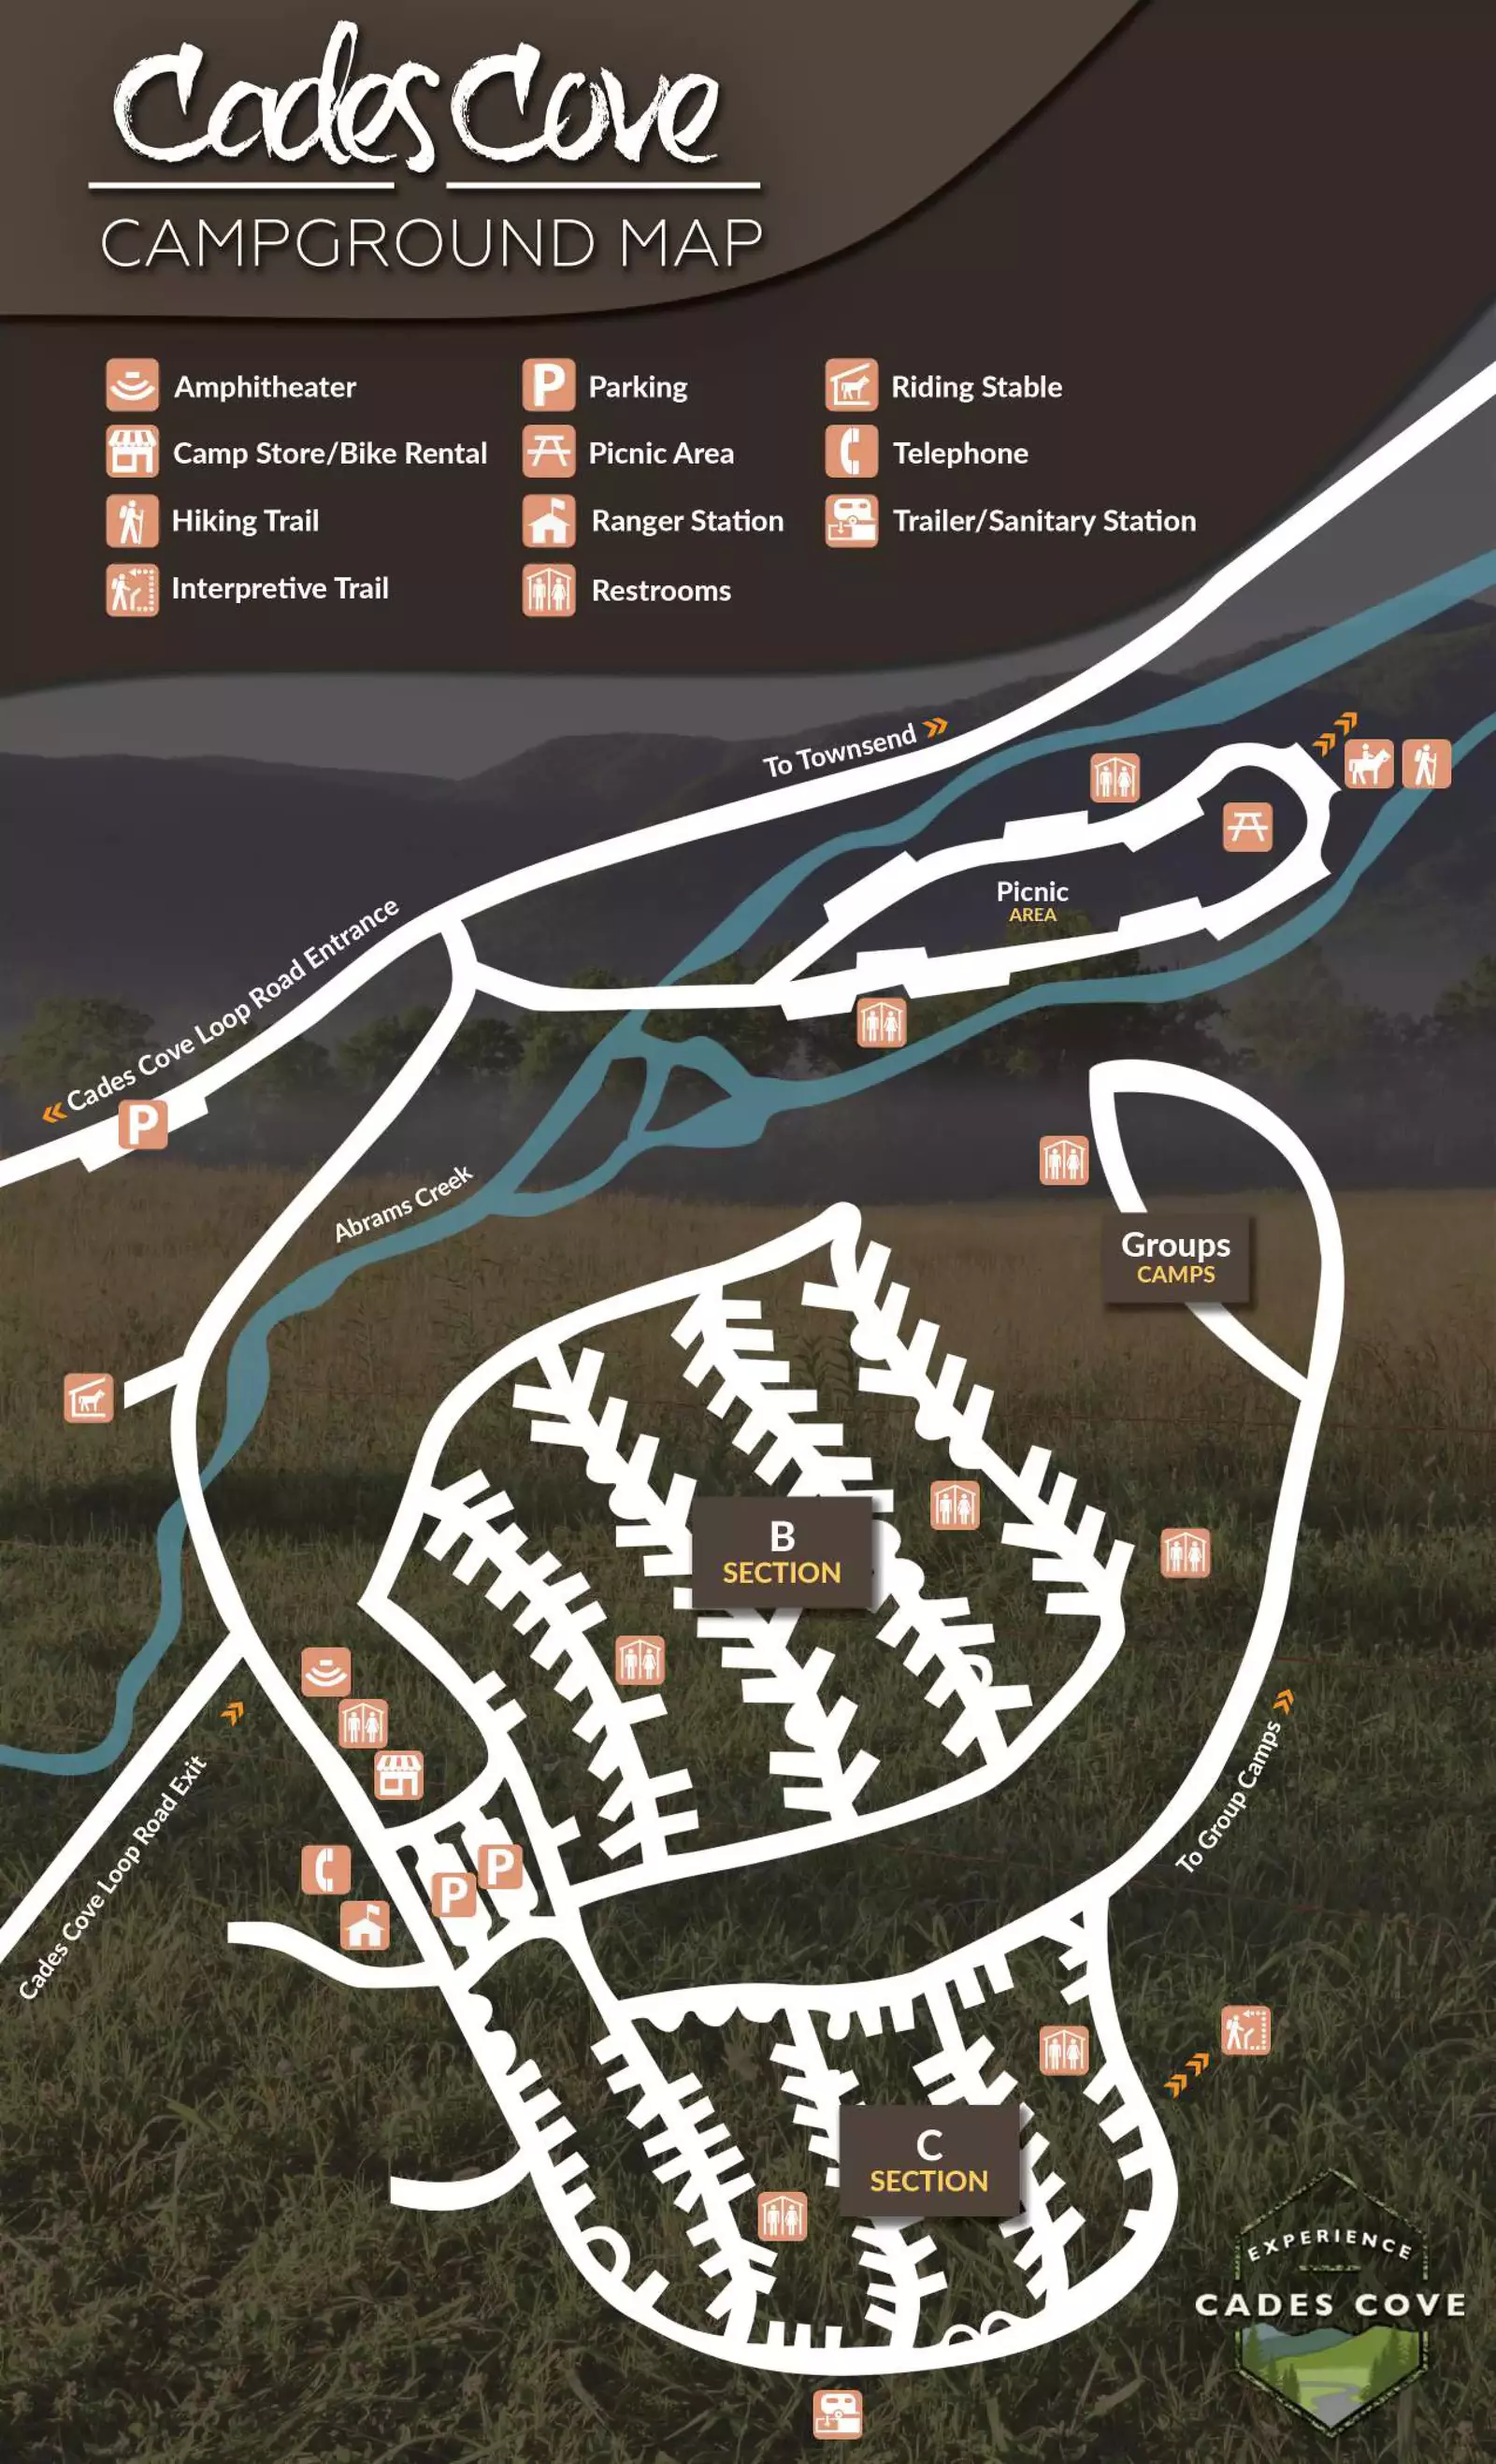 Cades Cove Campground map